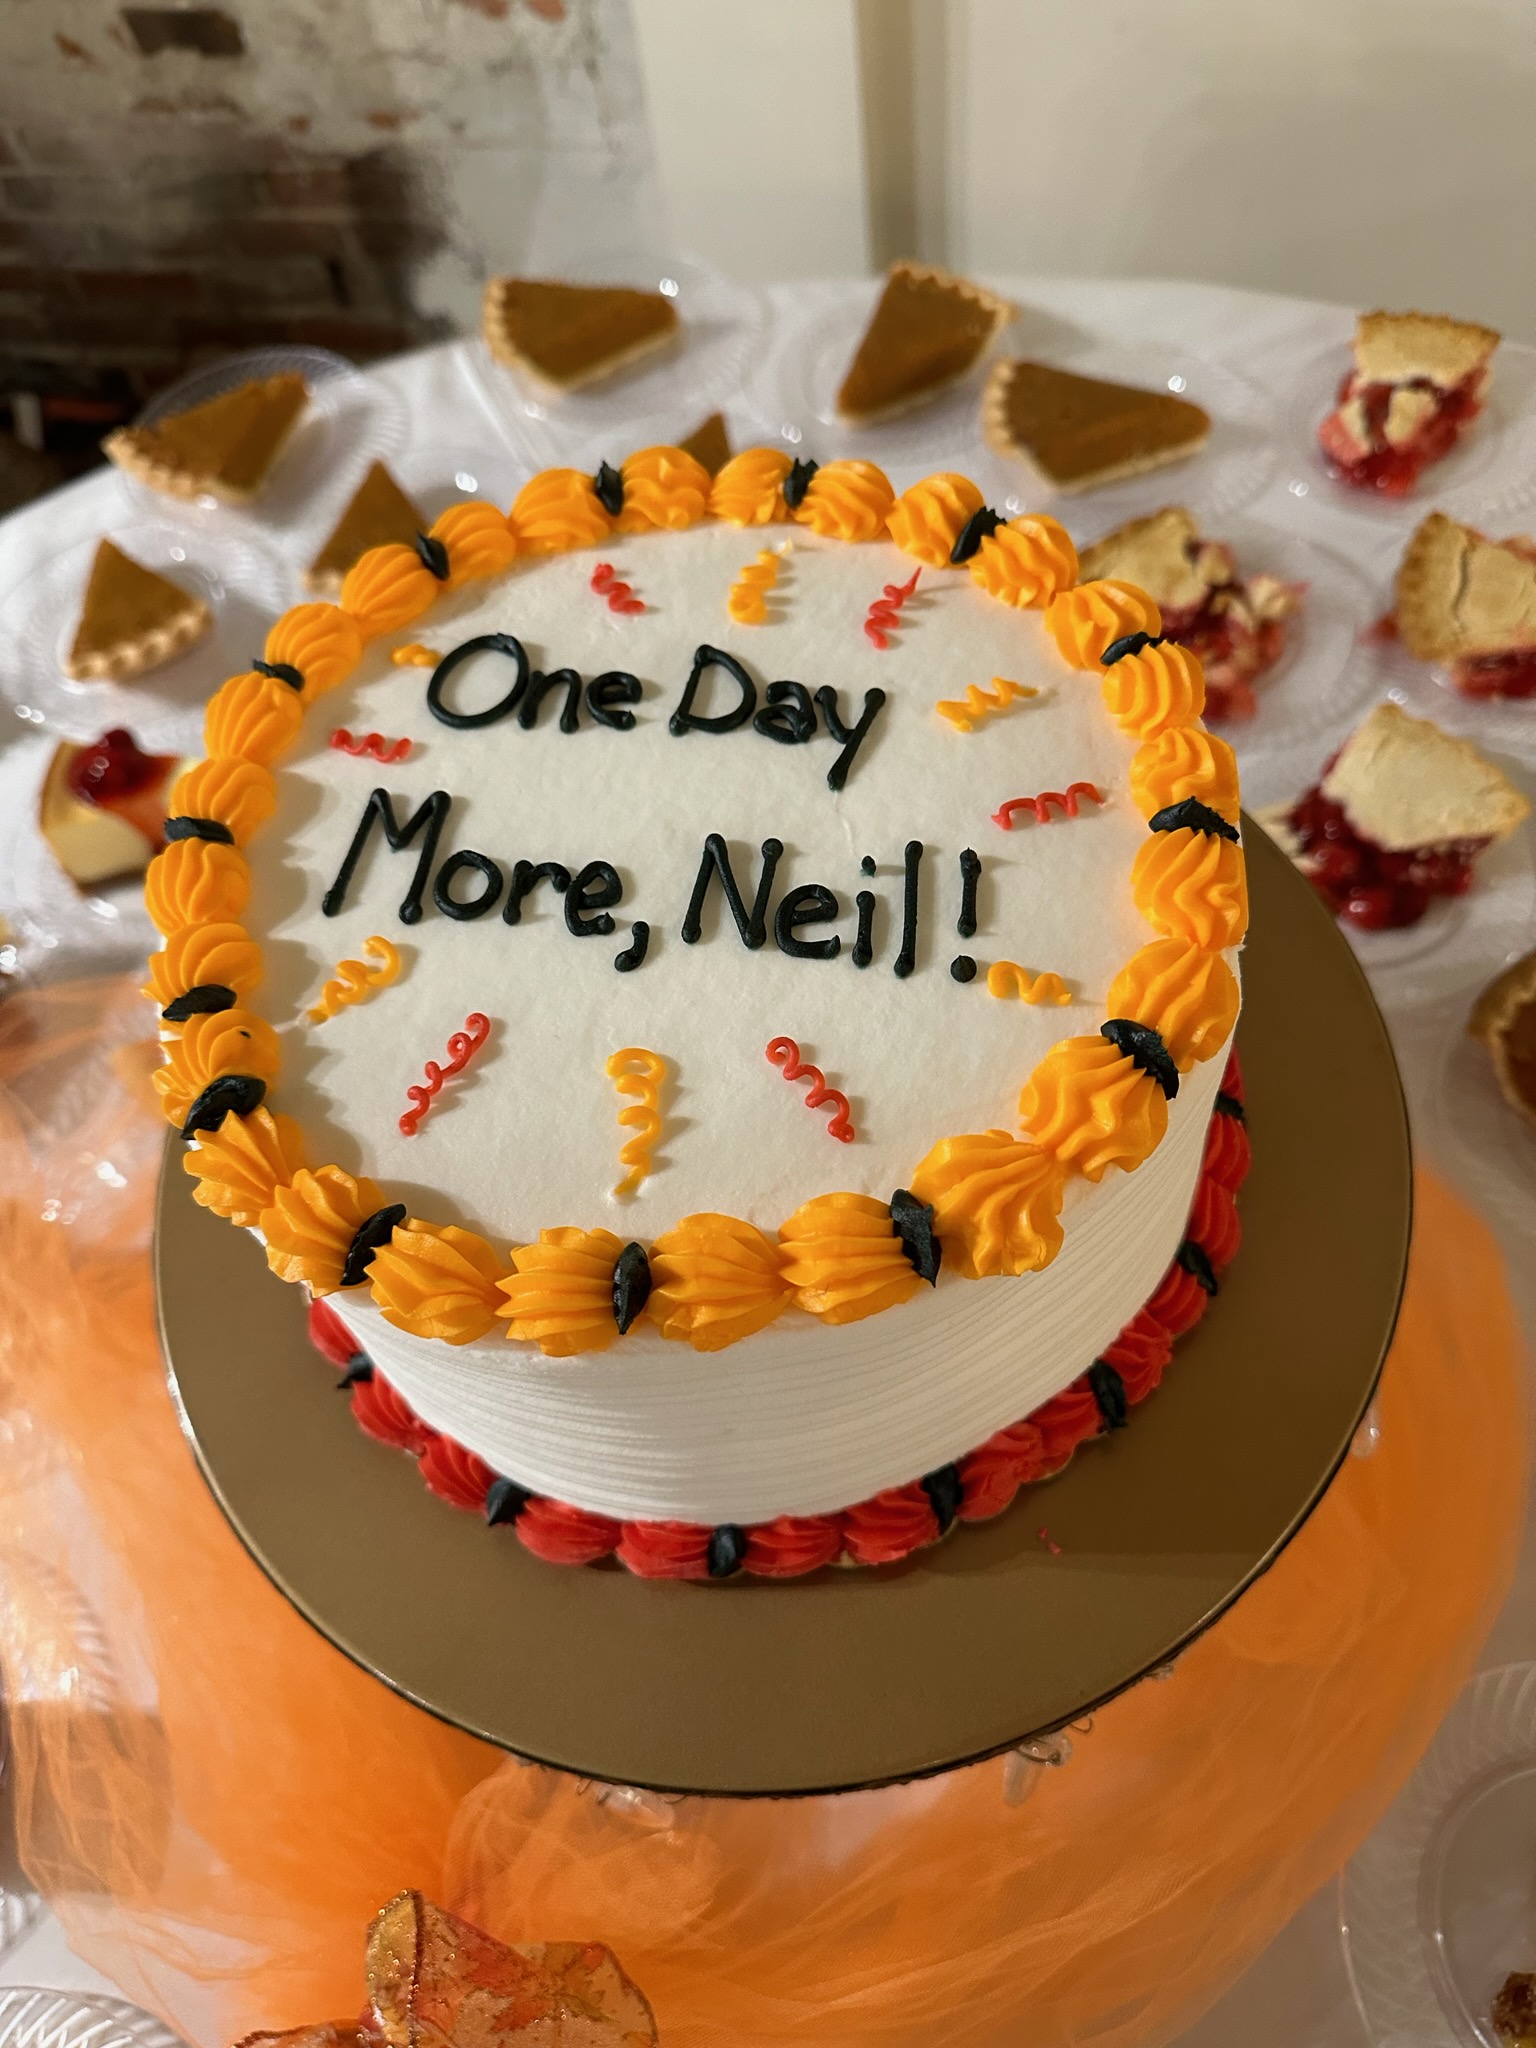 "A white cake with yellow and orange frosting details that reads "One Day More, Neil!""